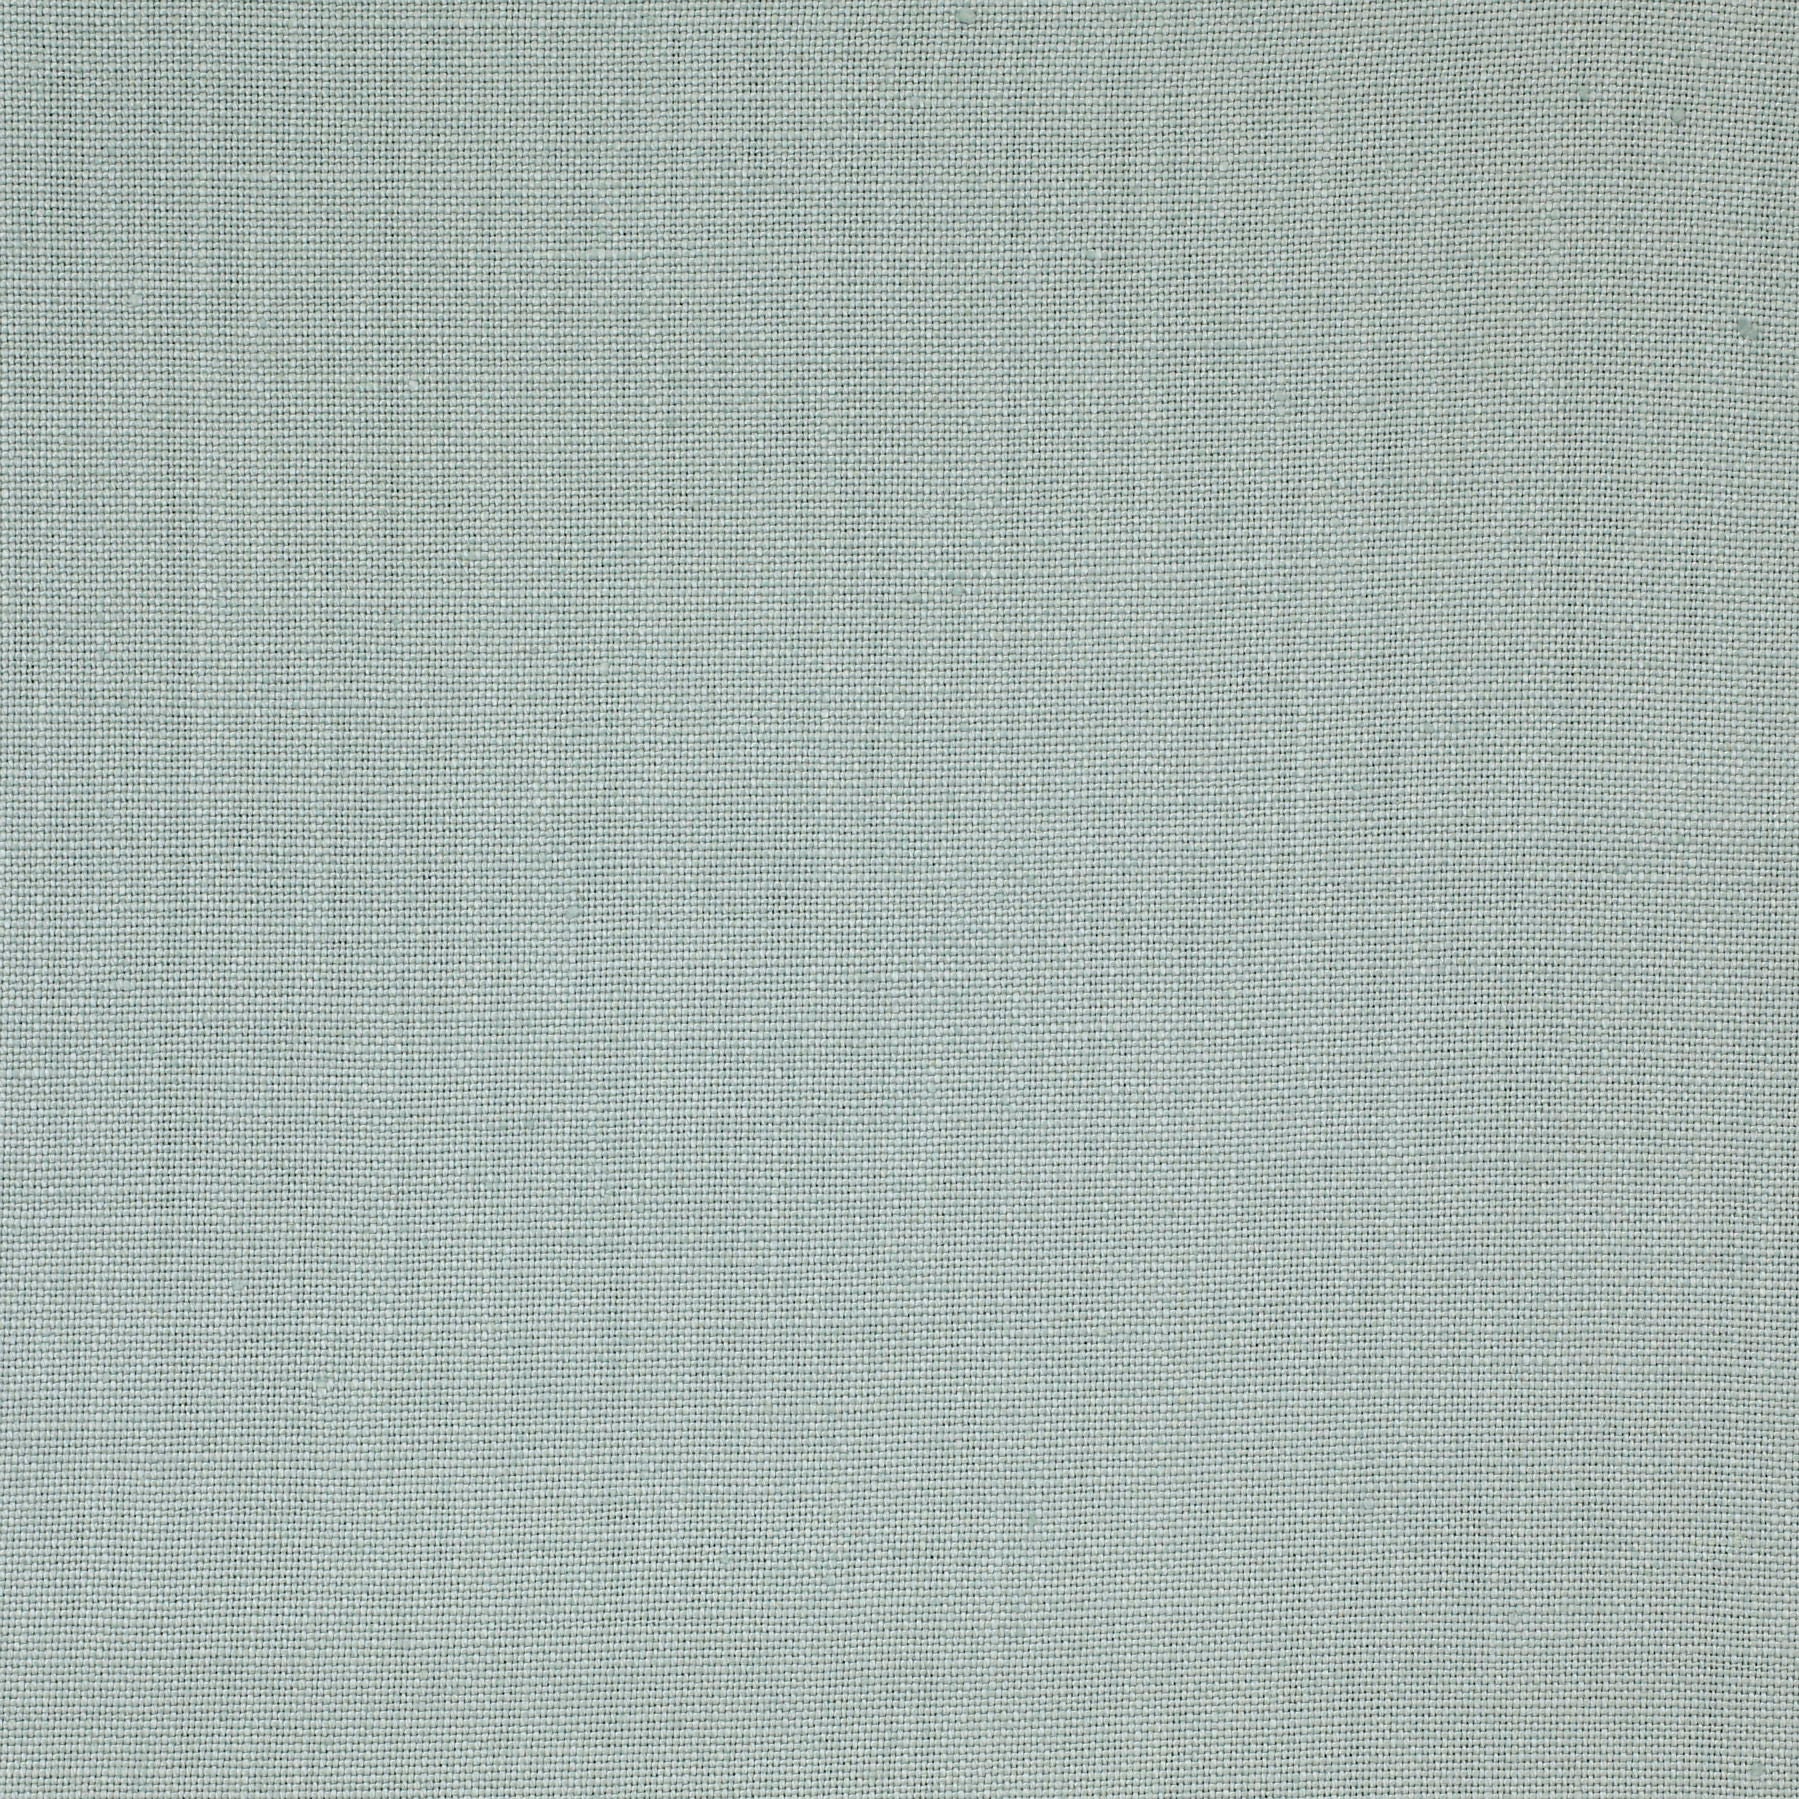 Hampton Linen fabric in jade color - pattern number 2012171.115.0 - by Lee Jofa in the Colour Compliments II collection.